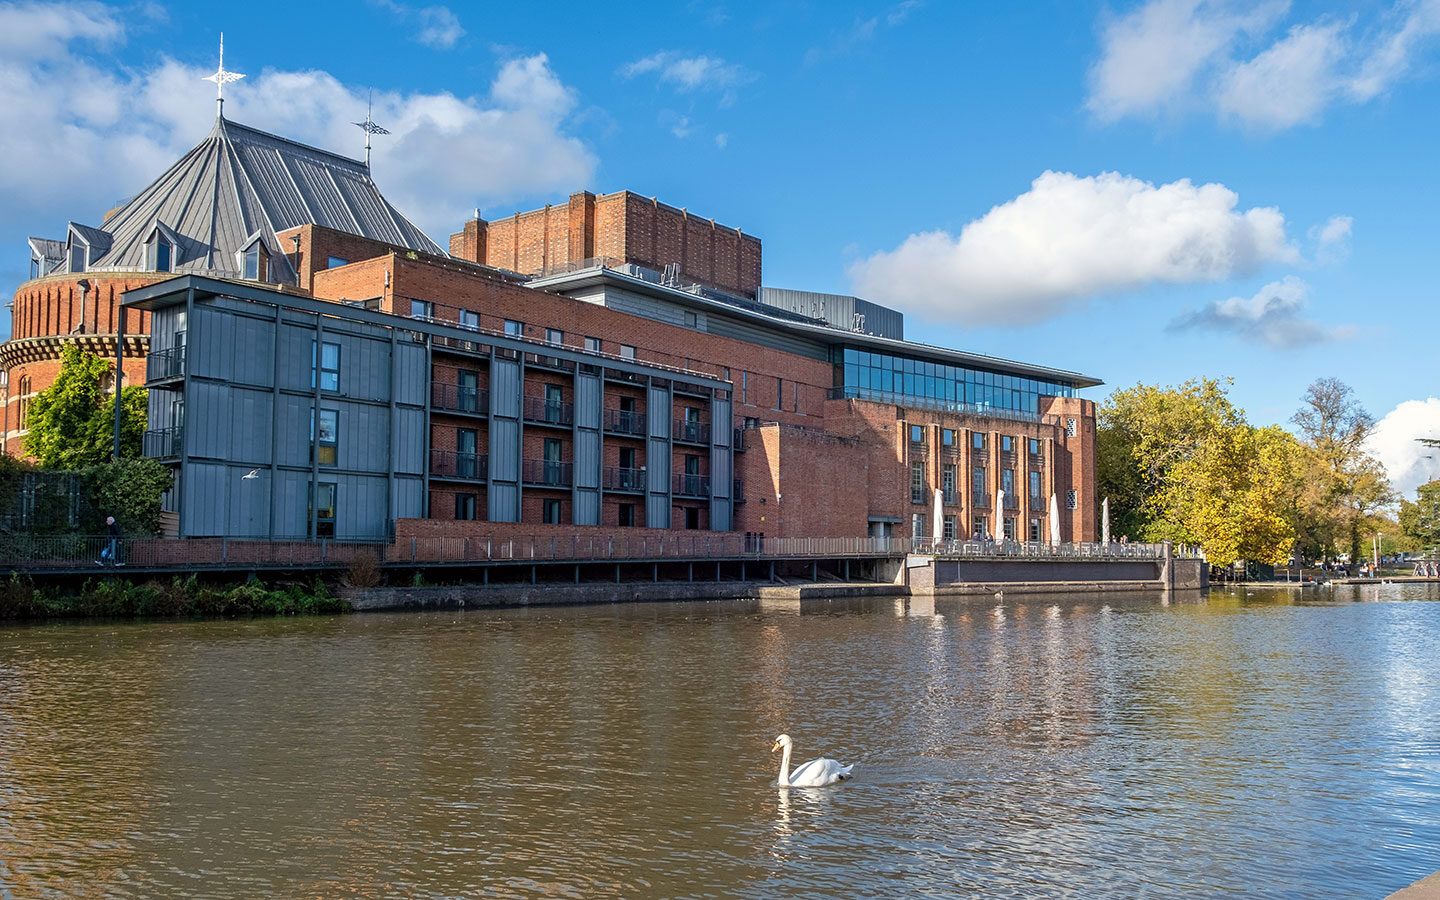 The Royal Shakespeare Company theatre by the River Avon in Stratford